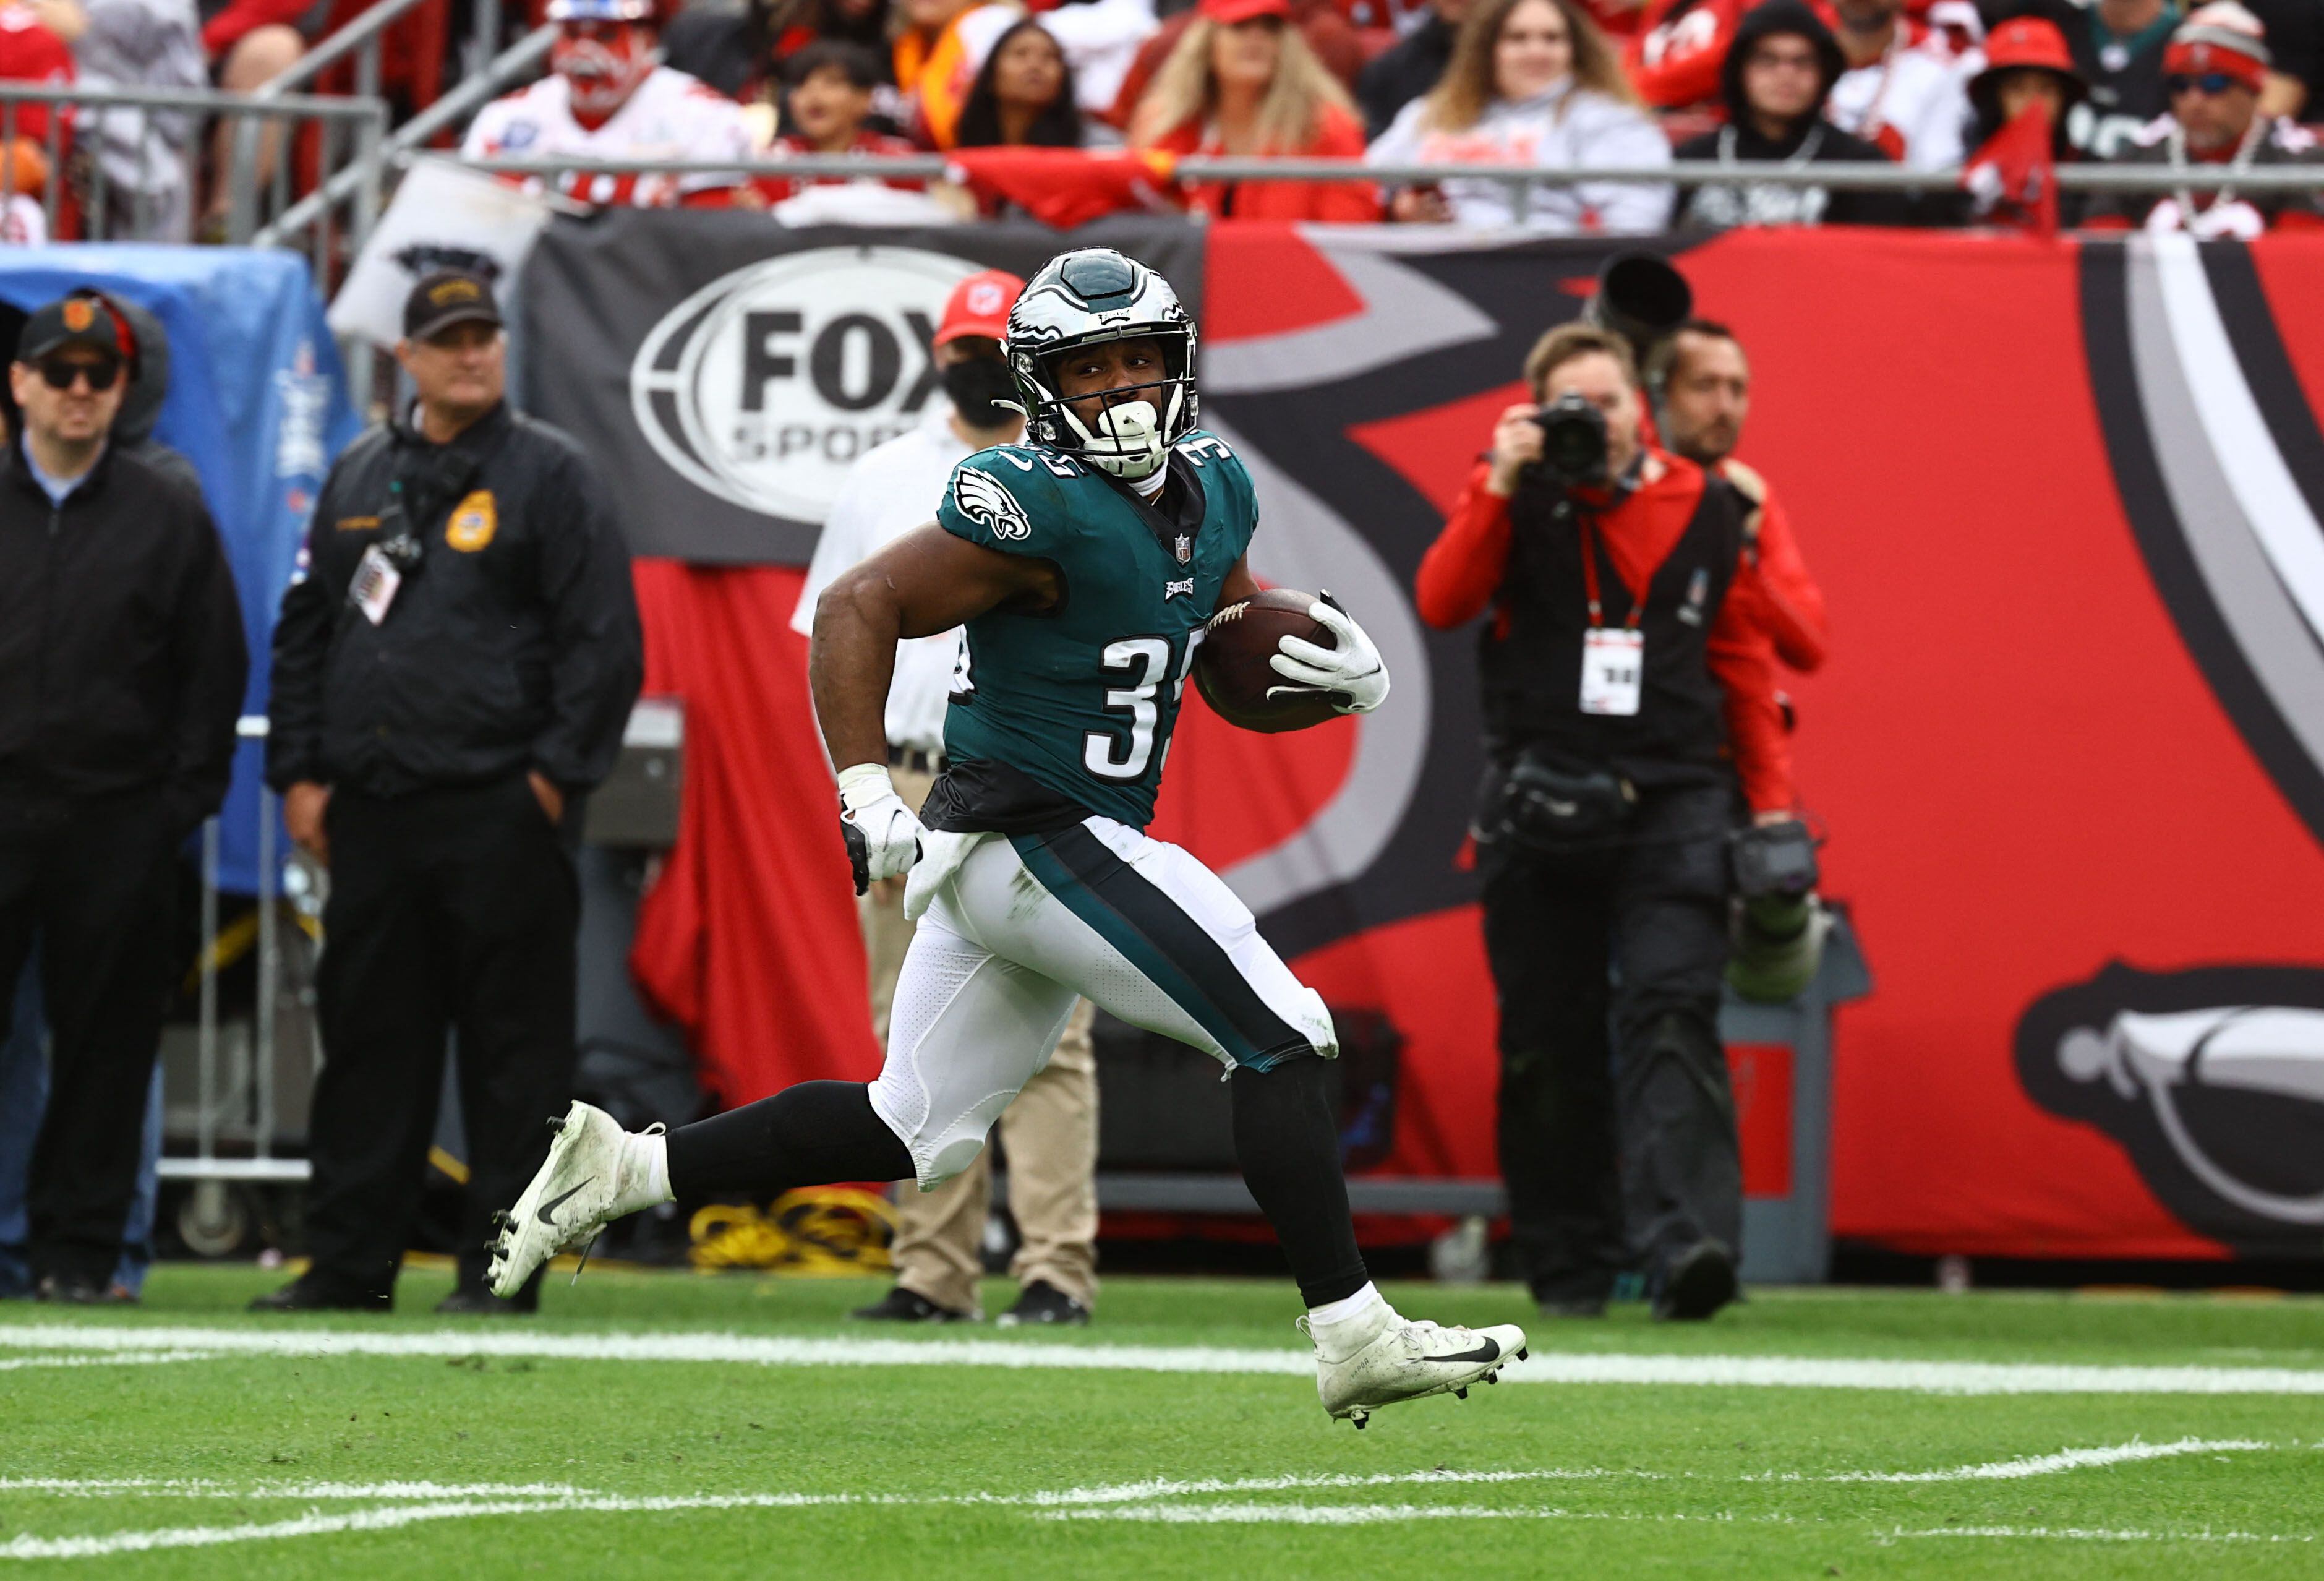 Jan 16, 2022; Tampa, Florida, USA; Philadelphia Eagles running back Boston Scott (35) scores a touchdown  against the Tampa Bay Buccaneers during the second half in a NFC Wild Card playoff football game at Raymond James Stadium. Mandatory Credit: Kim Klement-USA TODAY Sports